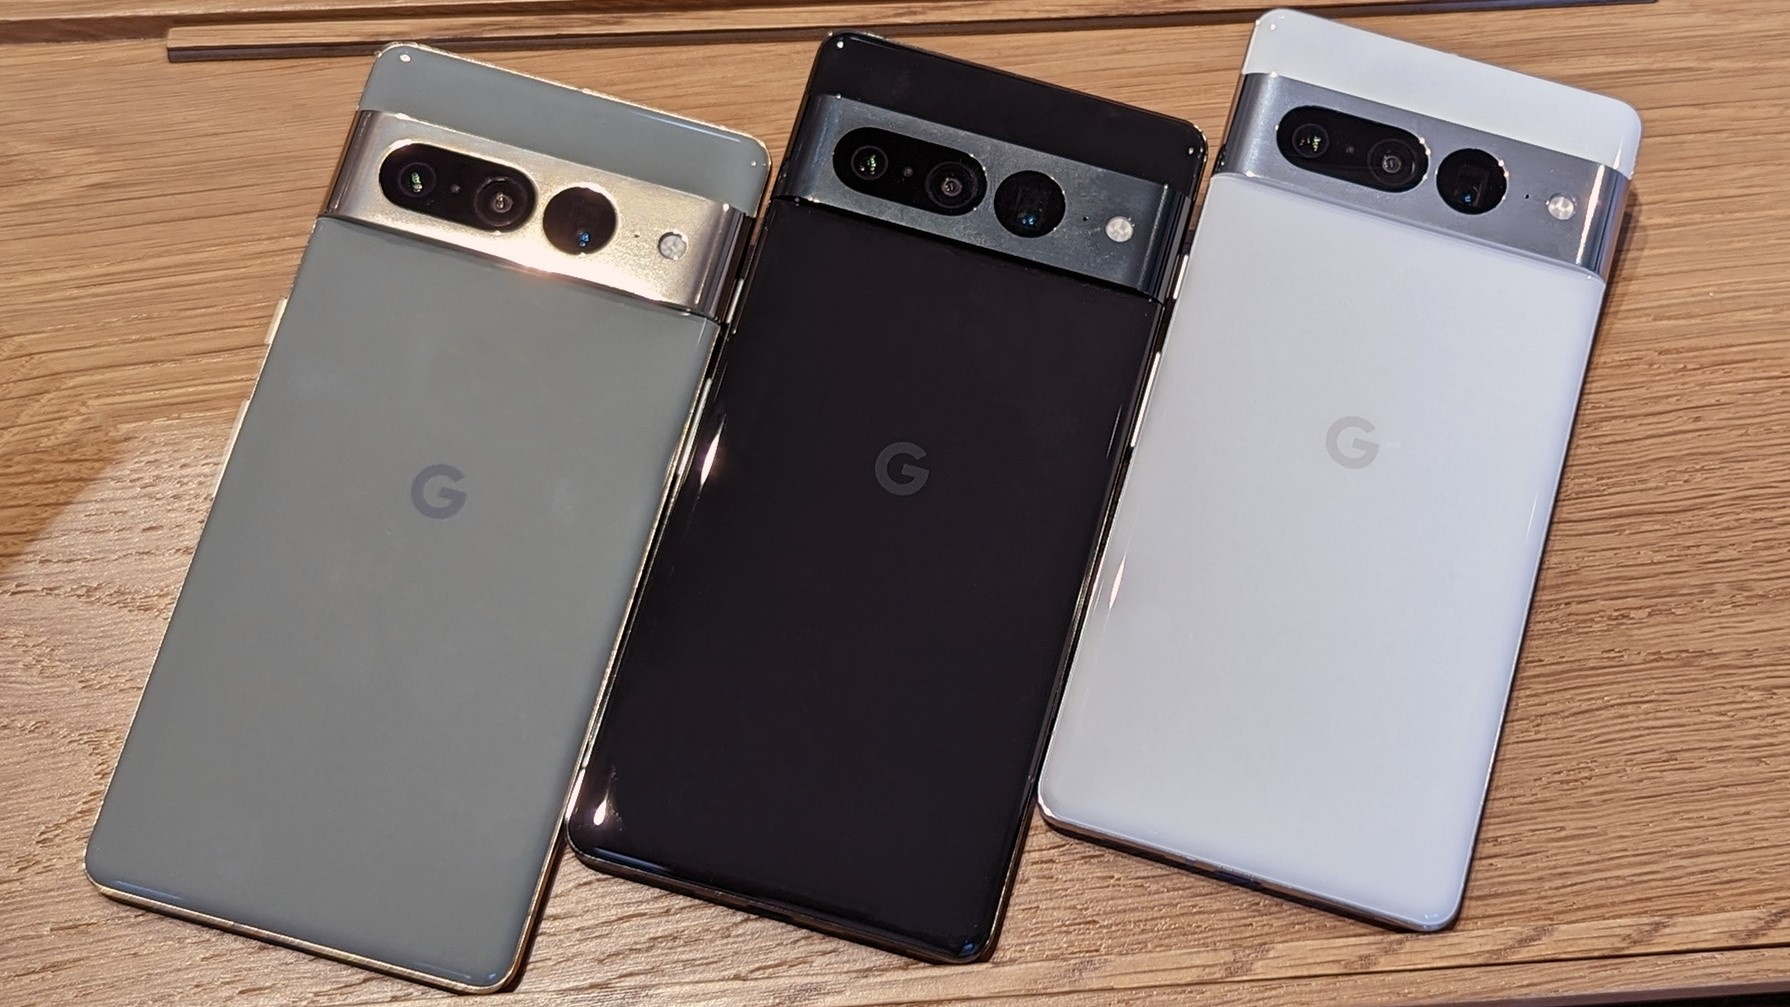 All colors of the Google Pixel 7 Pro were shown on a wooden table at Google's Fall 2022 event